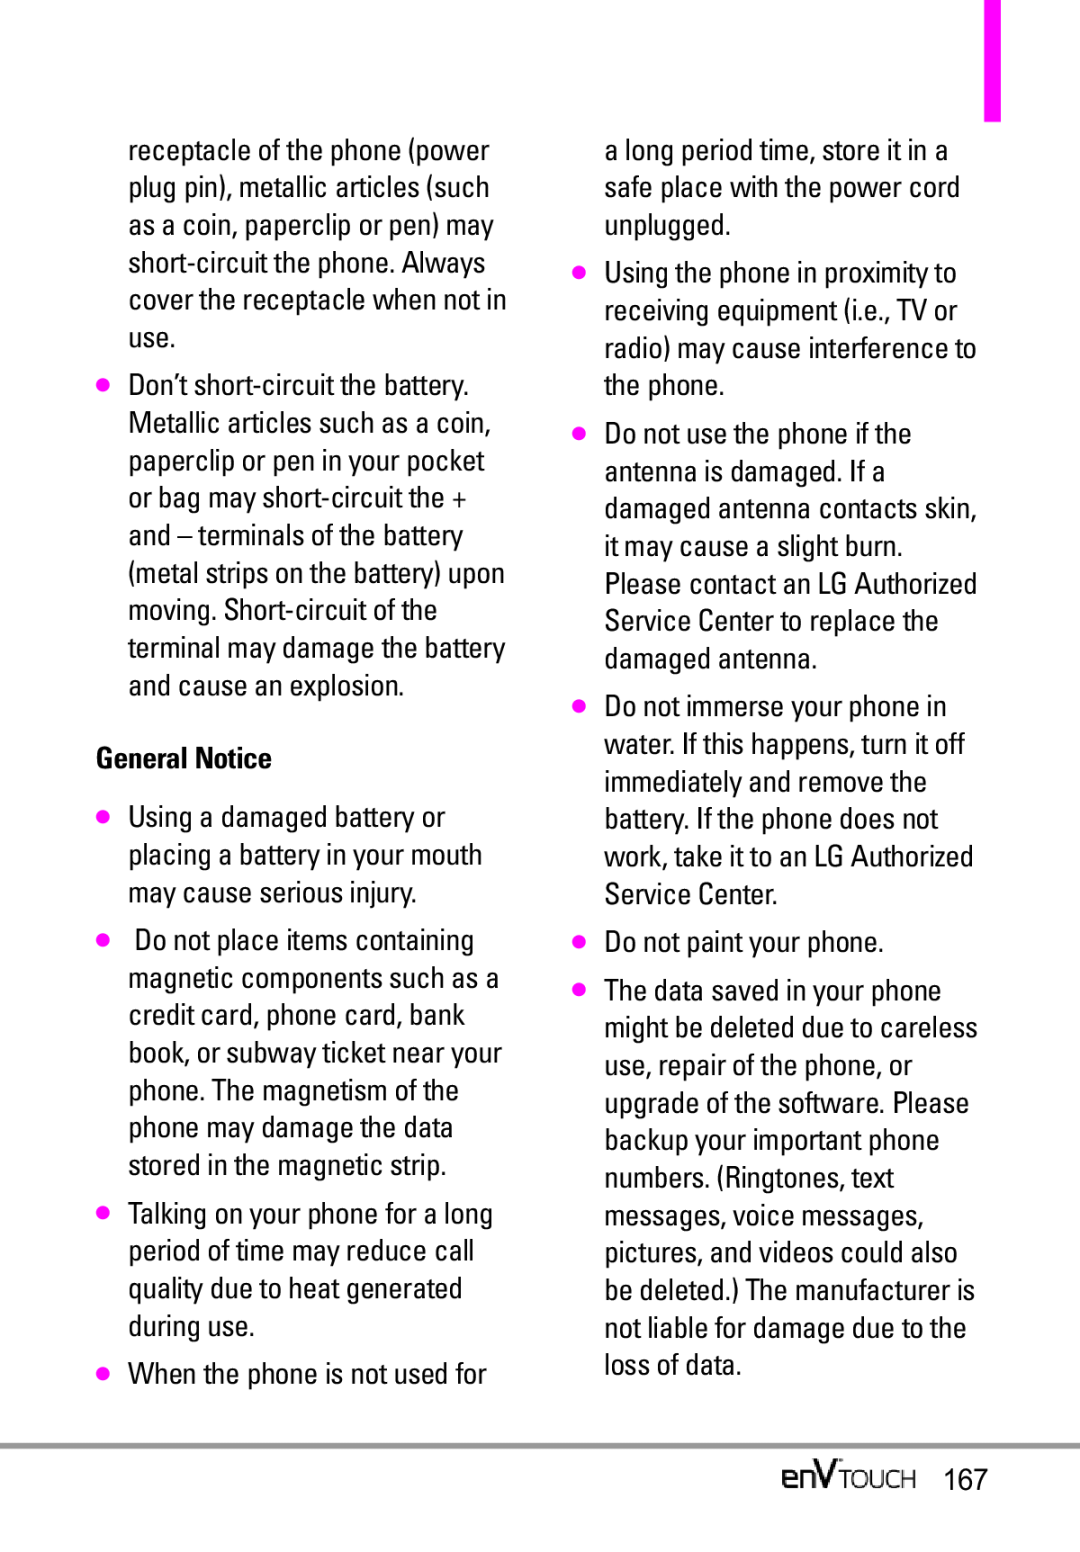 LG Electronics MMBB0332901 manual General Notice, When the phone is not used for, Do not paint your phone 